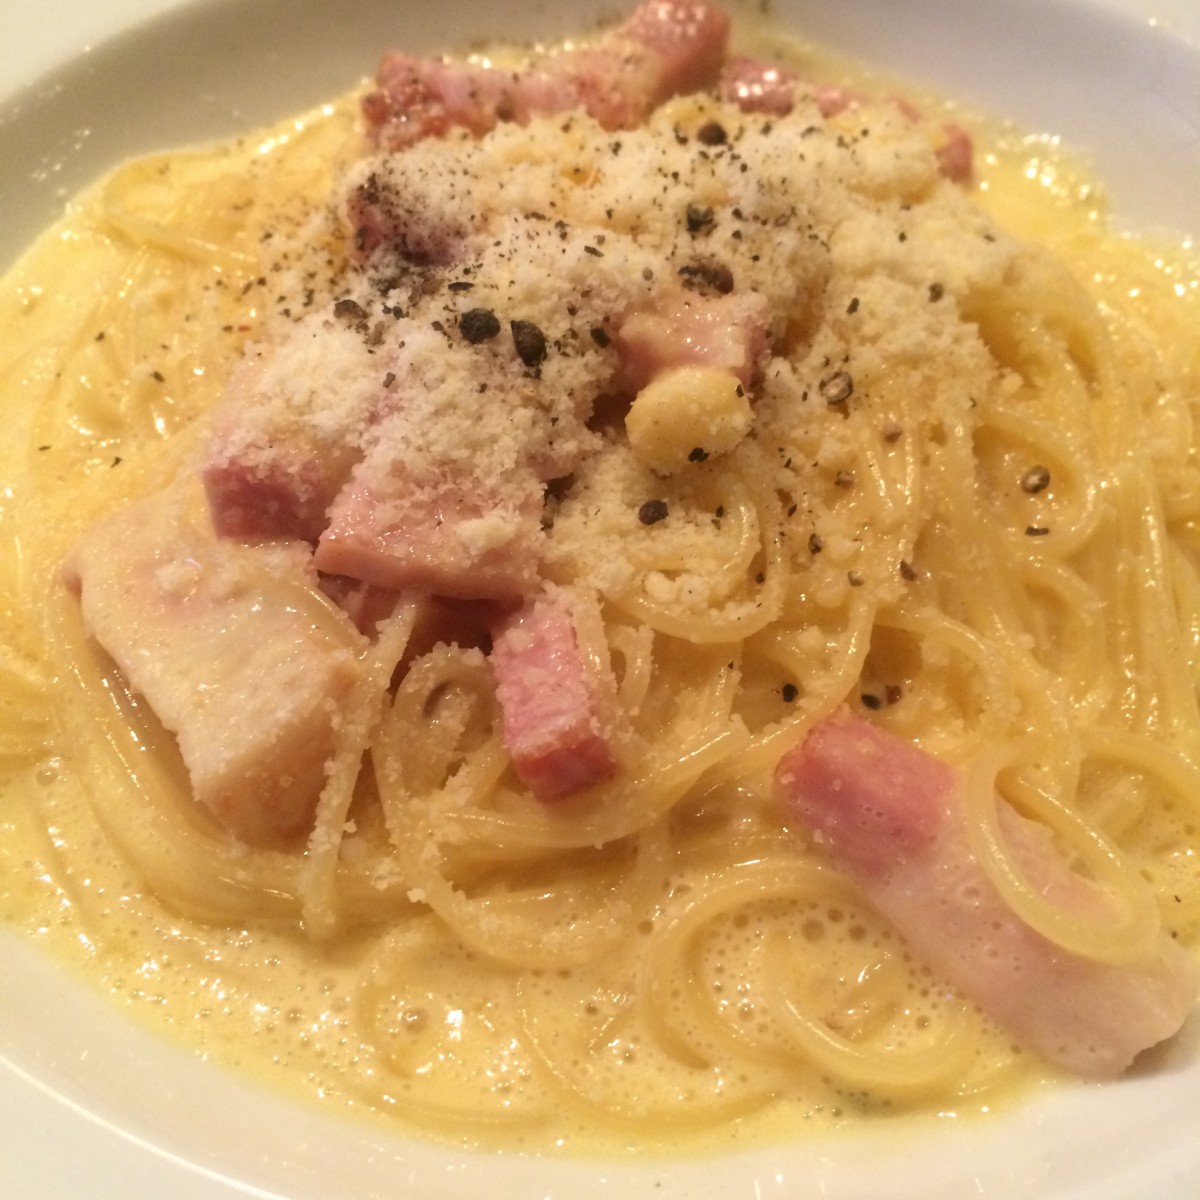 @tokyo grill harbourのパスタ